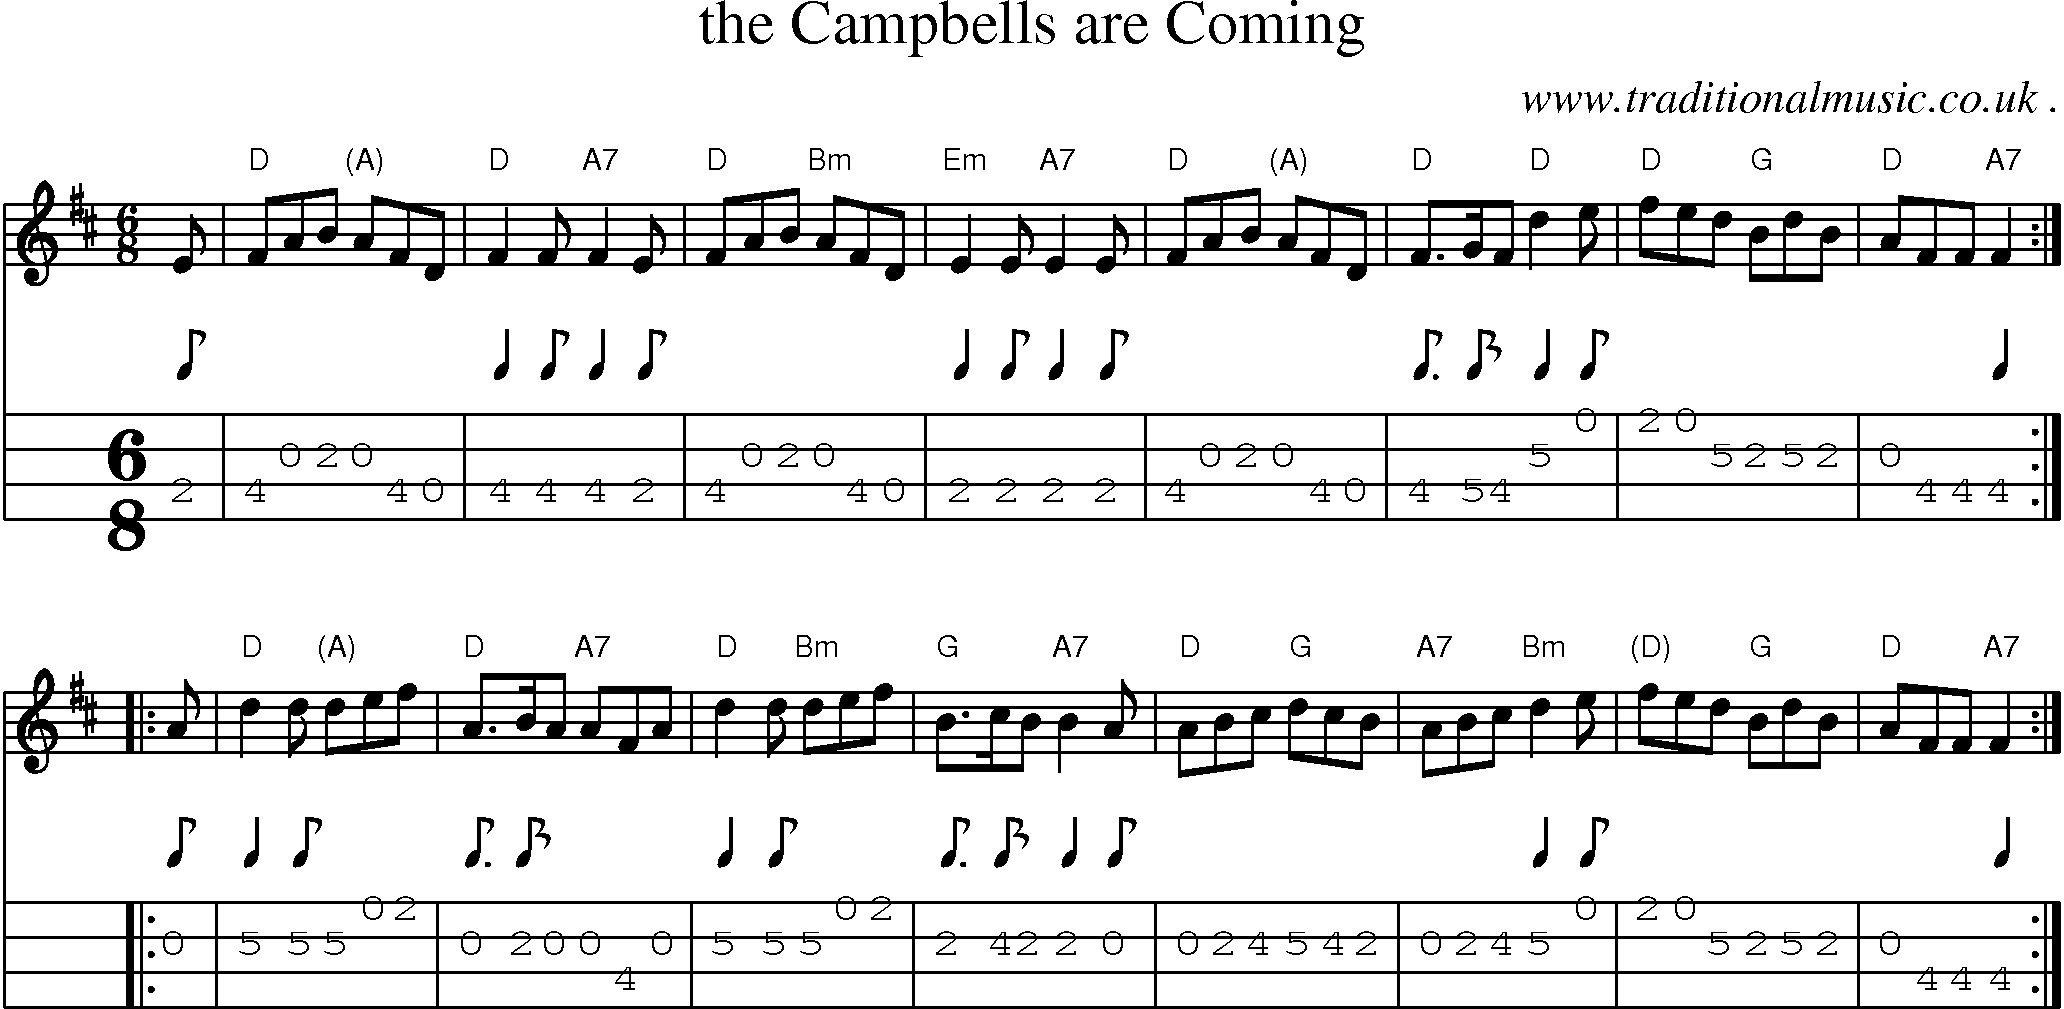 Sheet-music  score, Chords and Mandolin Tabs for The Campbells Are Coming